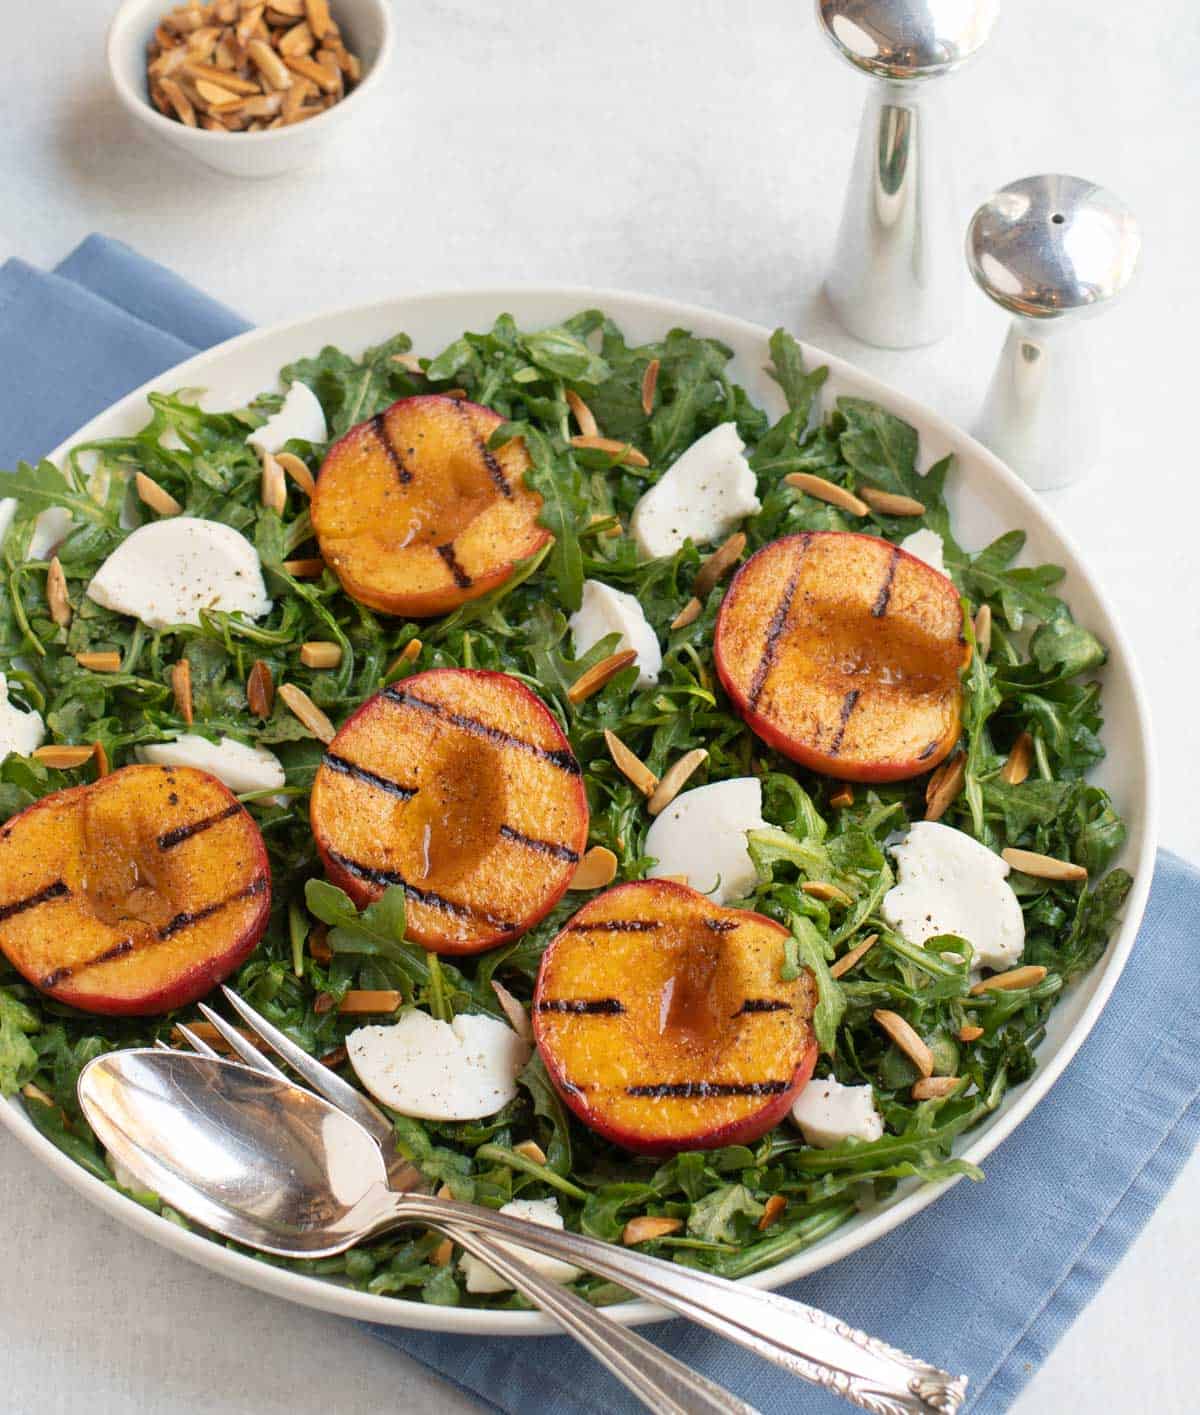 Grilled peaches and sliced burrata cheese atop baby arugula